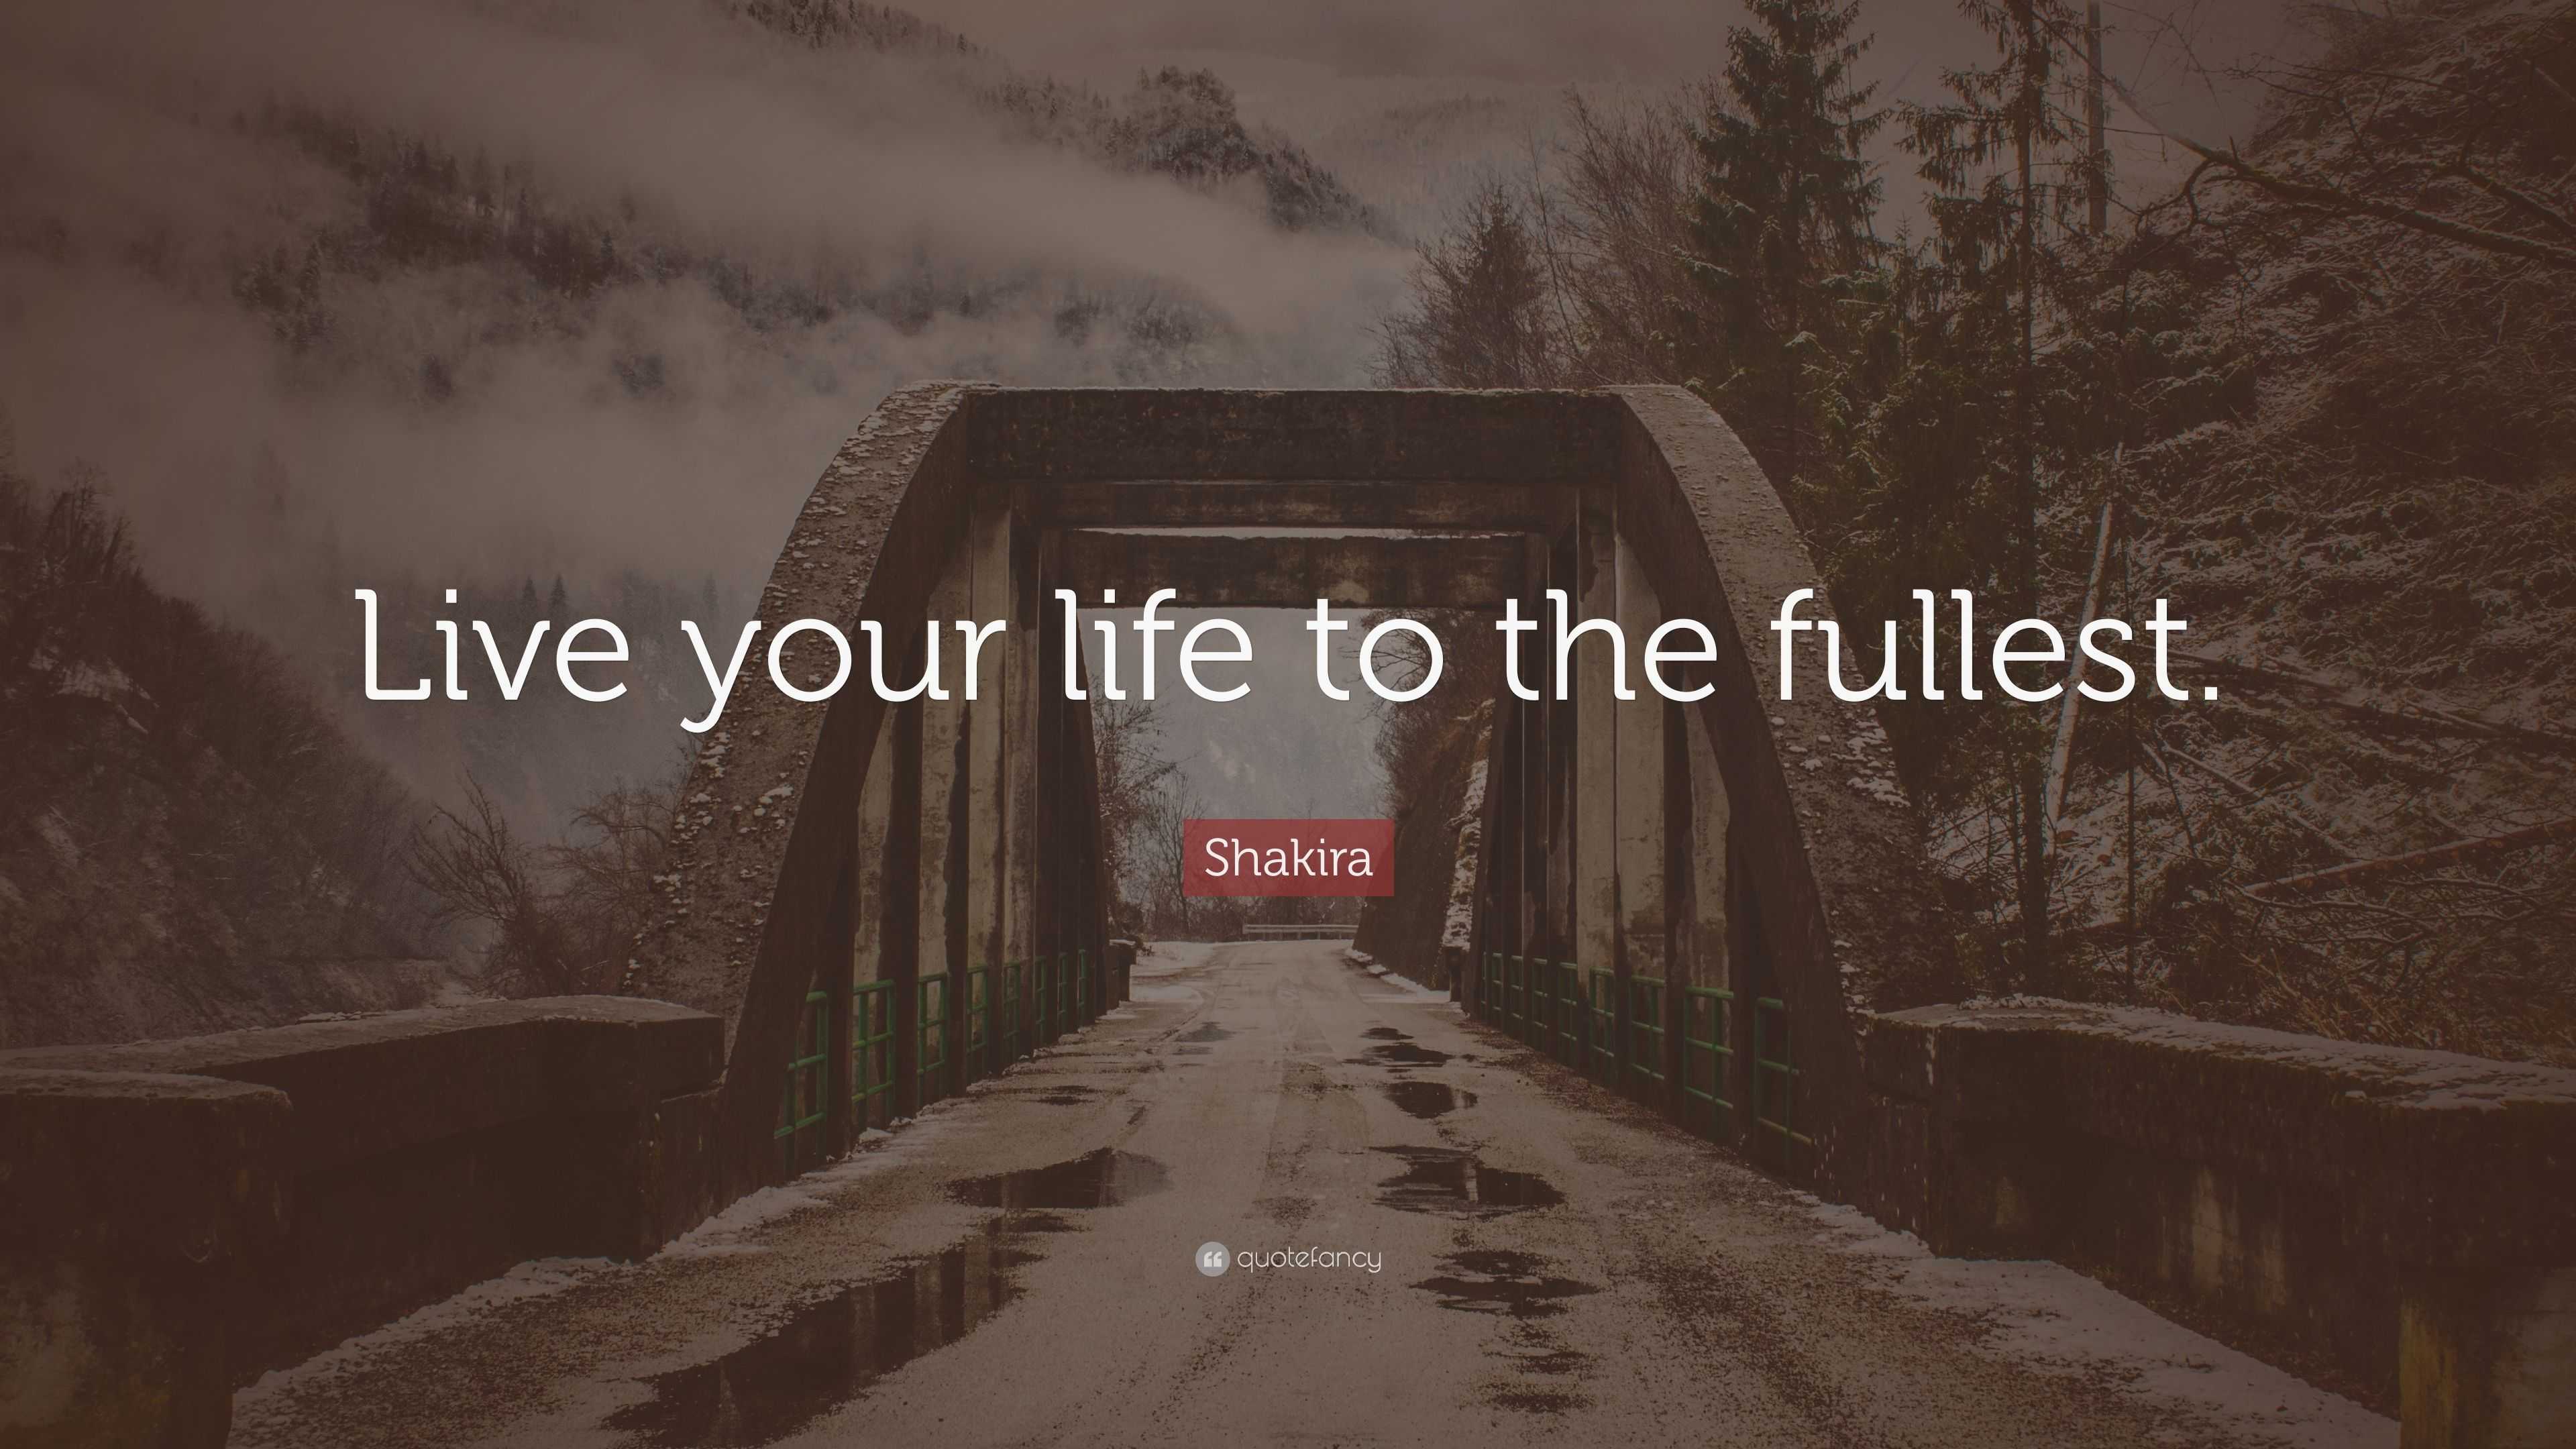 How To Live Your Life To The Fullest - Shakira Quote: